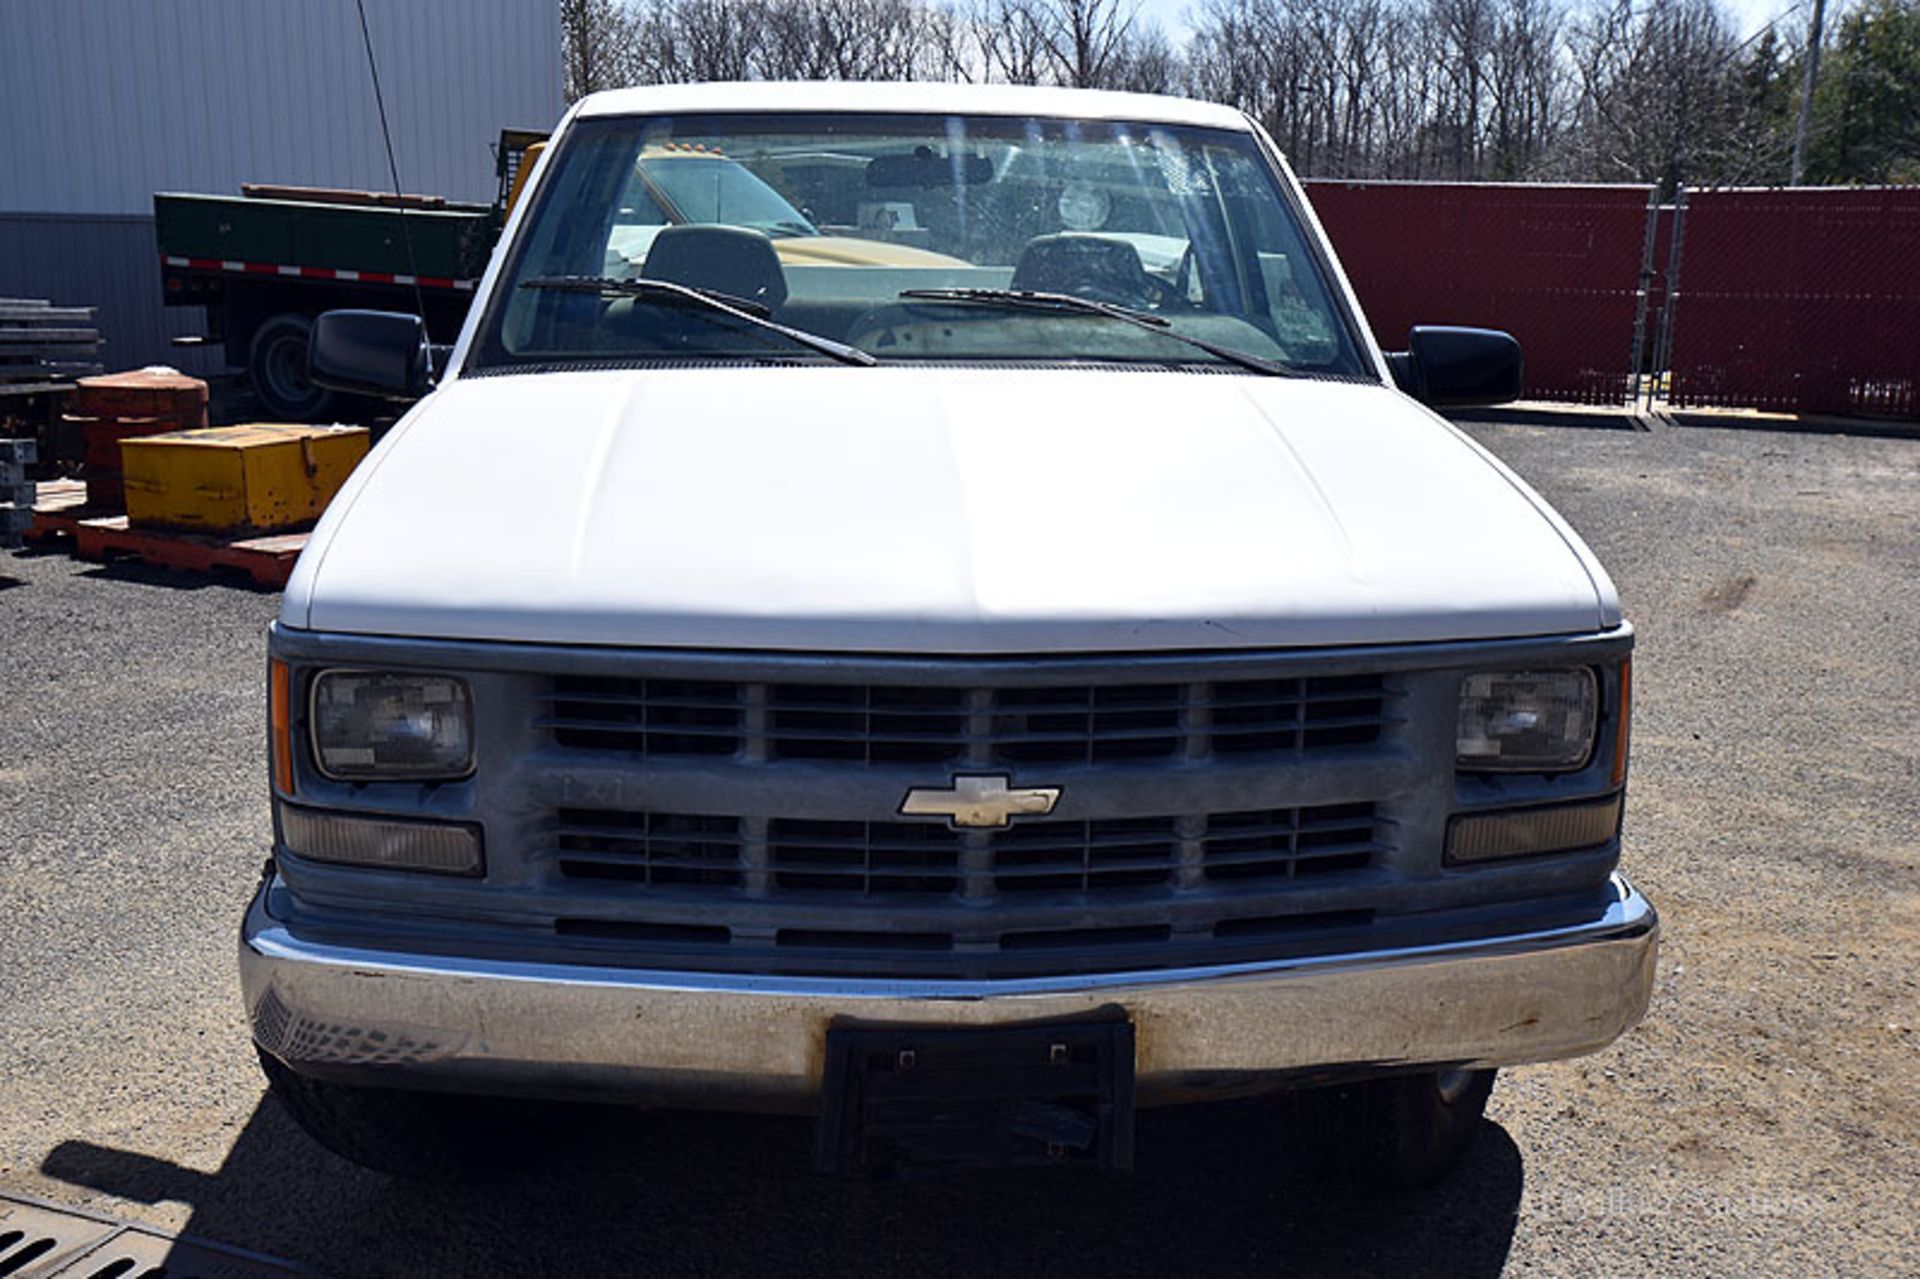 1995 Chevrolet 3500 Utility TruckVIN: 1GBGC34K2SE159122Miles: 222,760 Indicated On Odometer8' Bed